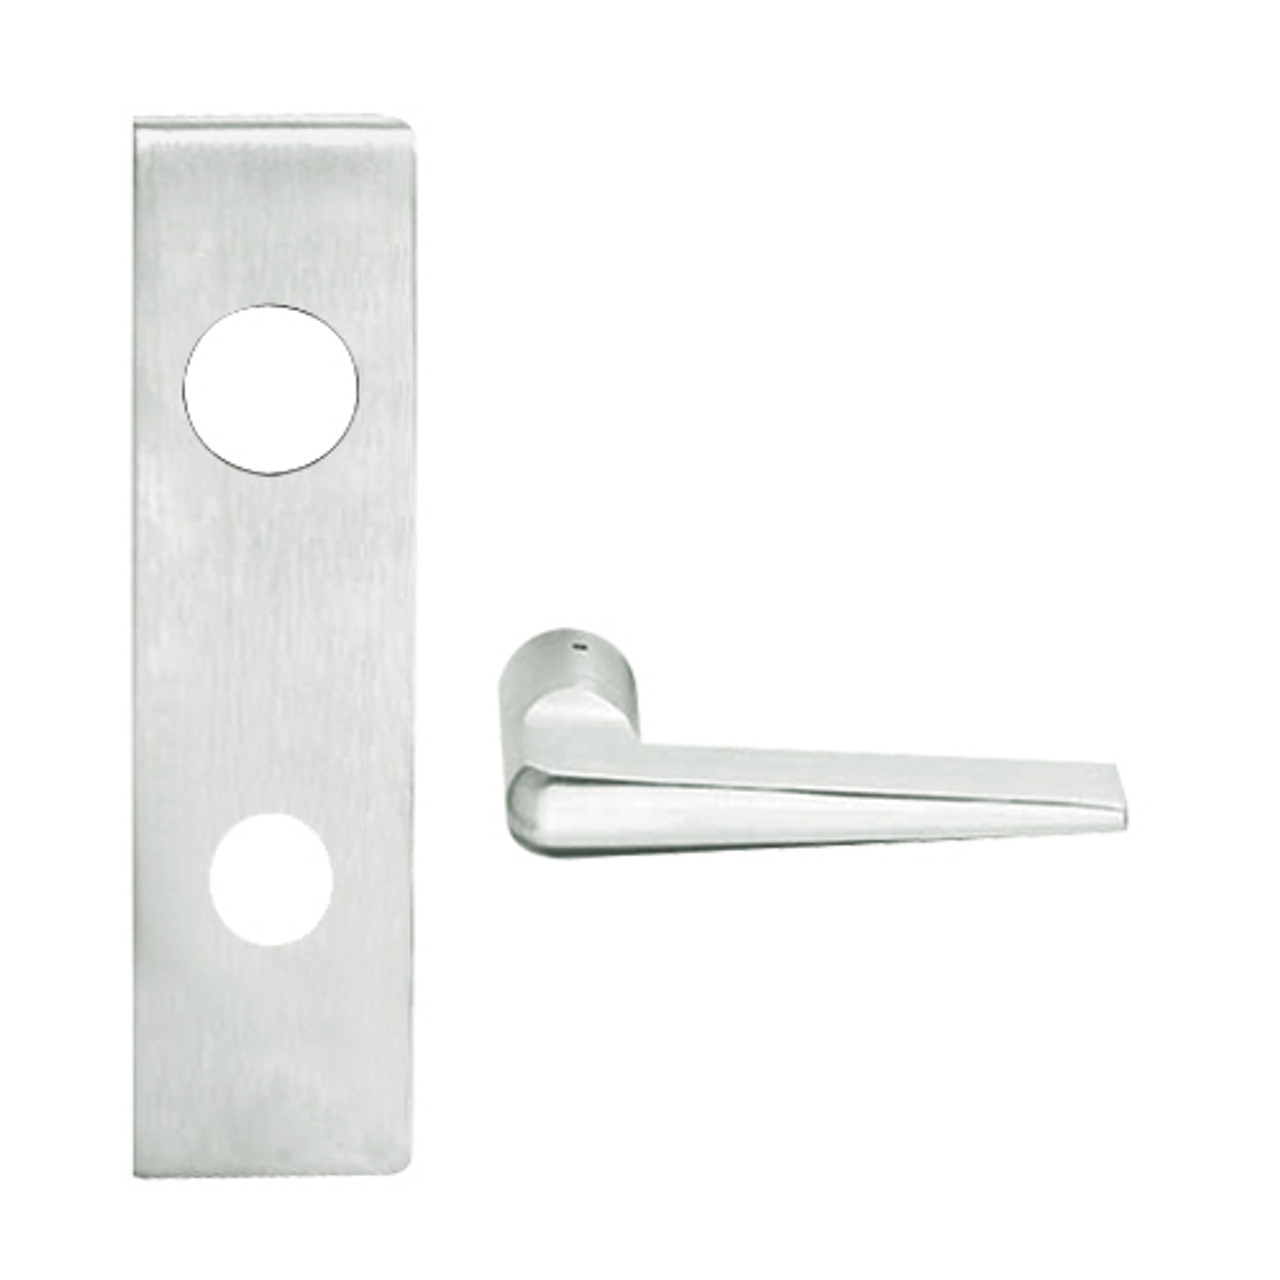 L9050R-05N-619 Schlage L Series Entrance Commercial Mortise Lock with 05 Cast Lever Design and Full Size Core in Satin Nickel